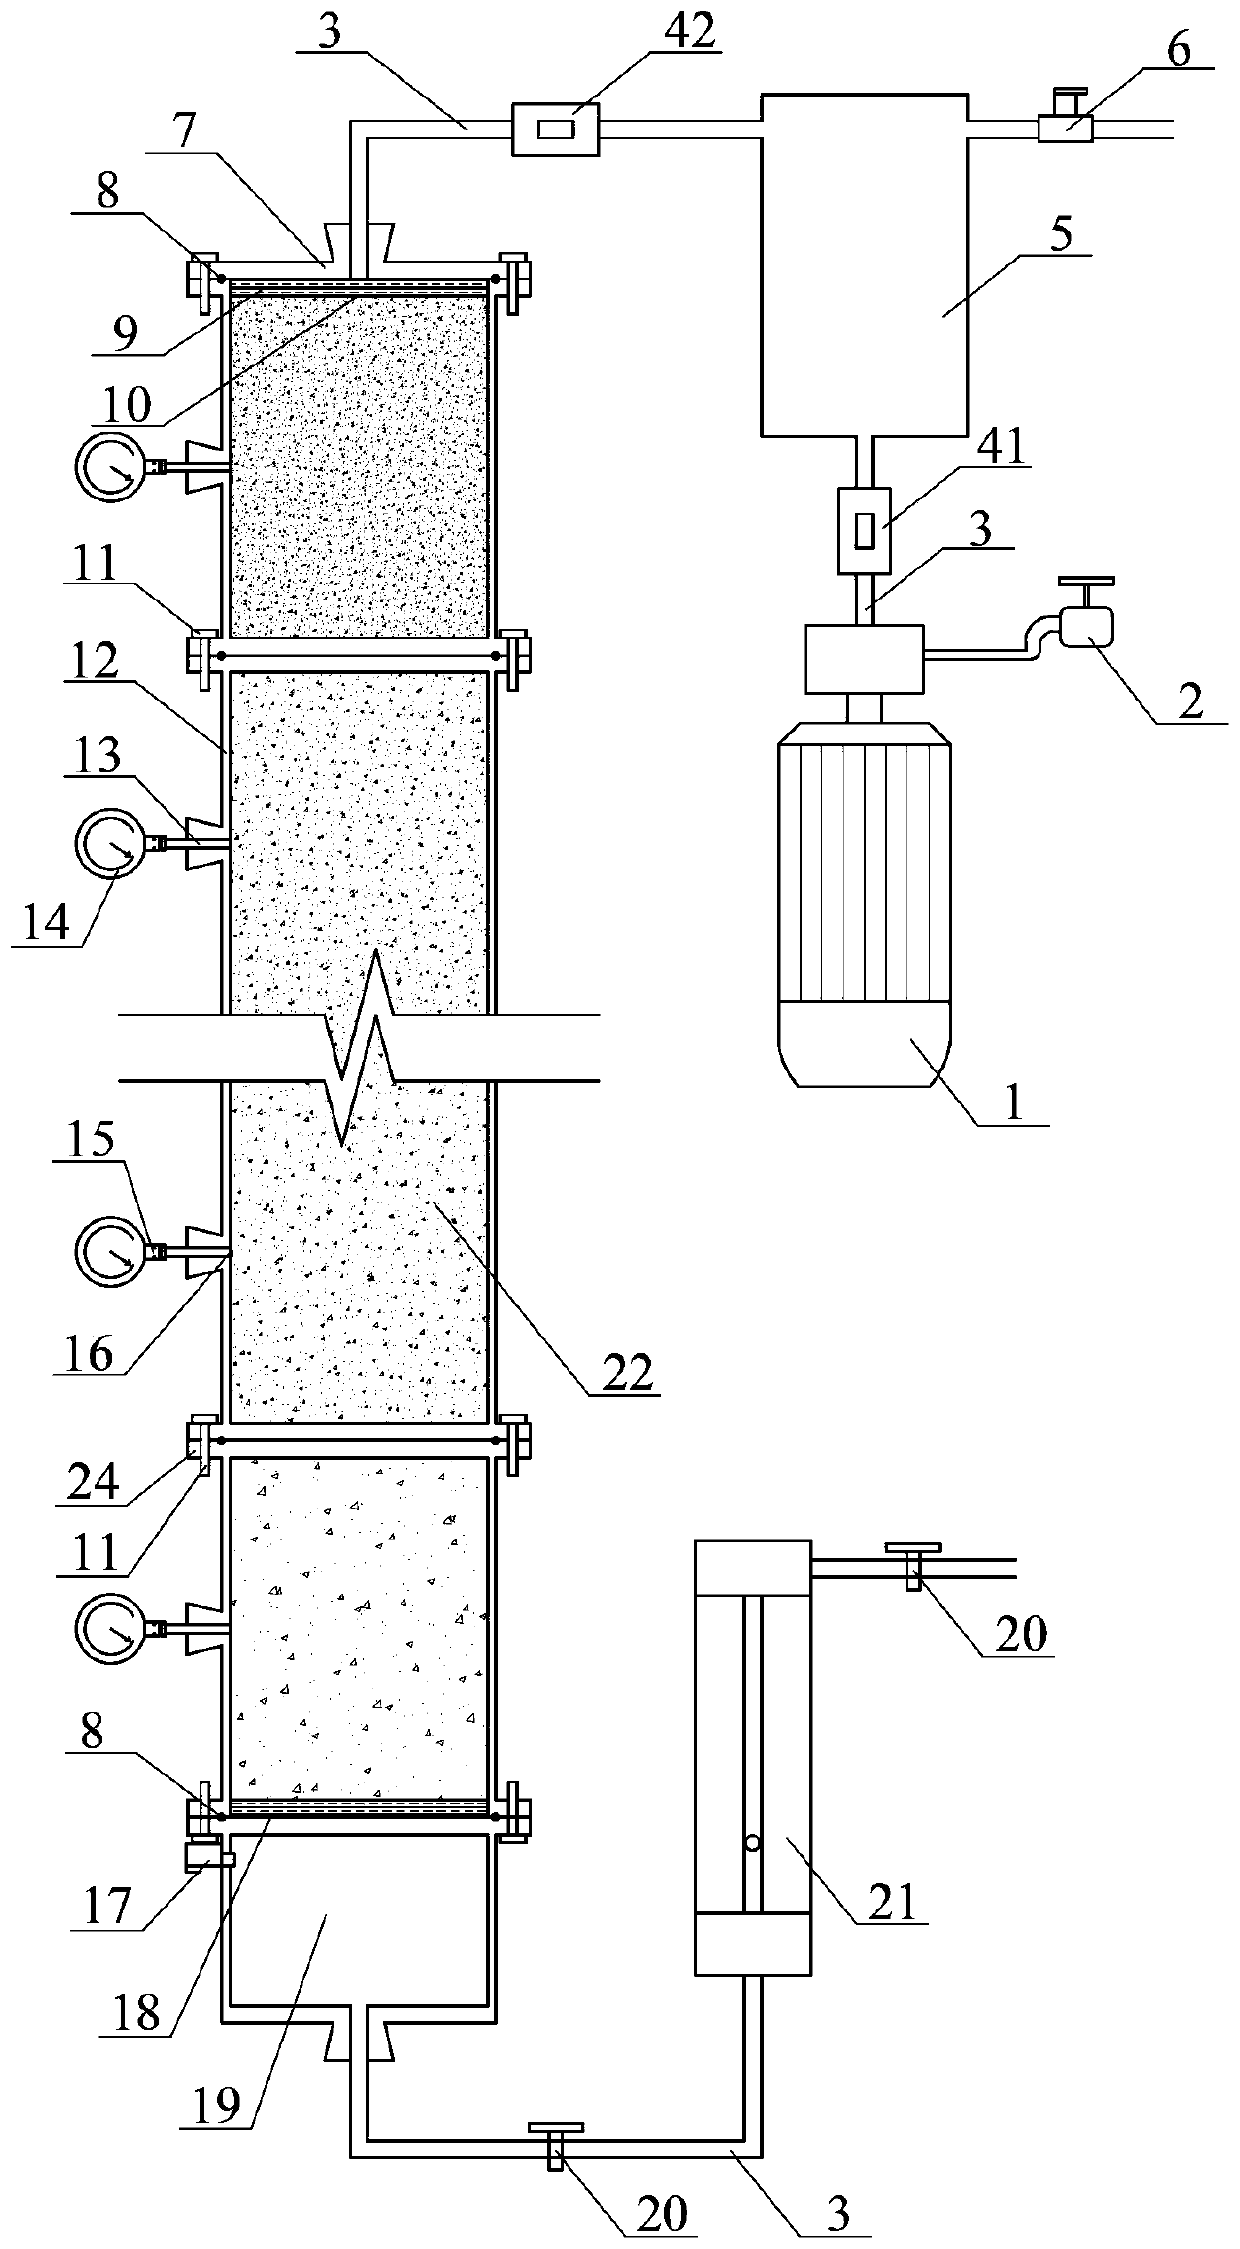 Permeation measuring device and method for layered sand migration process under different osmotic gradients